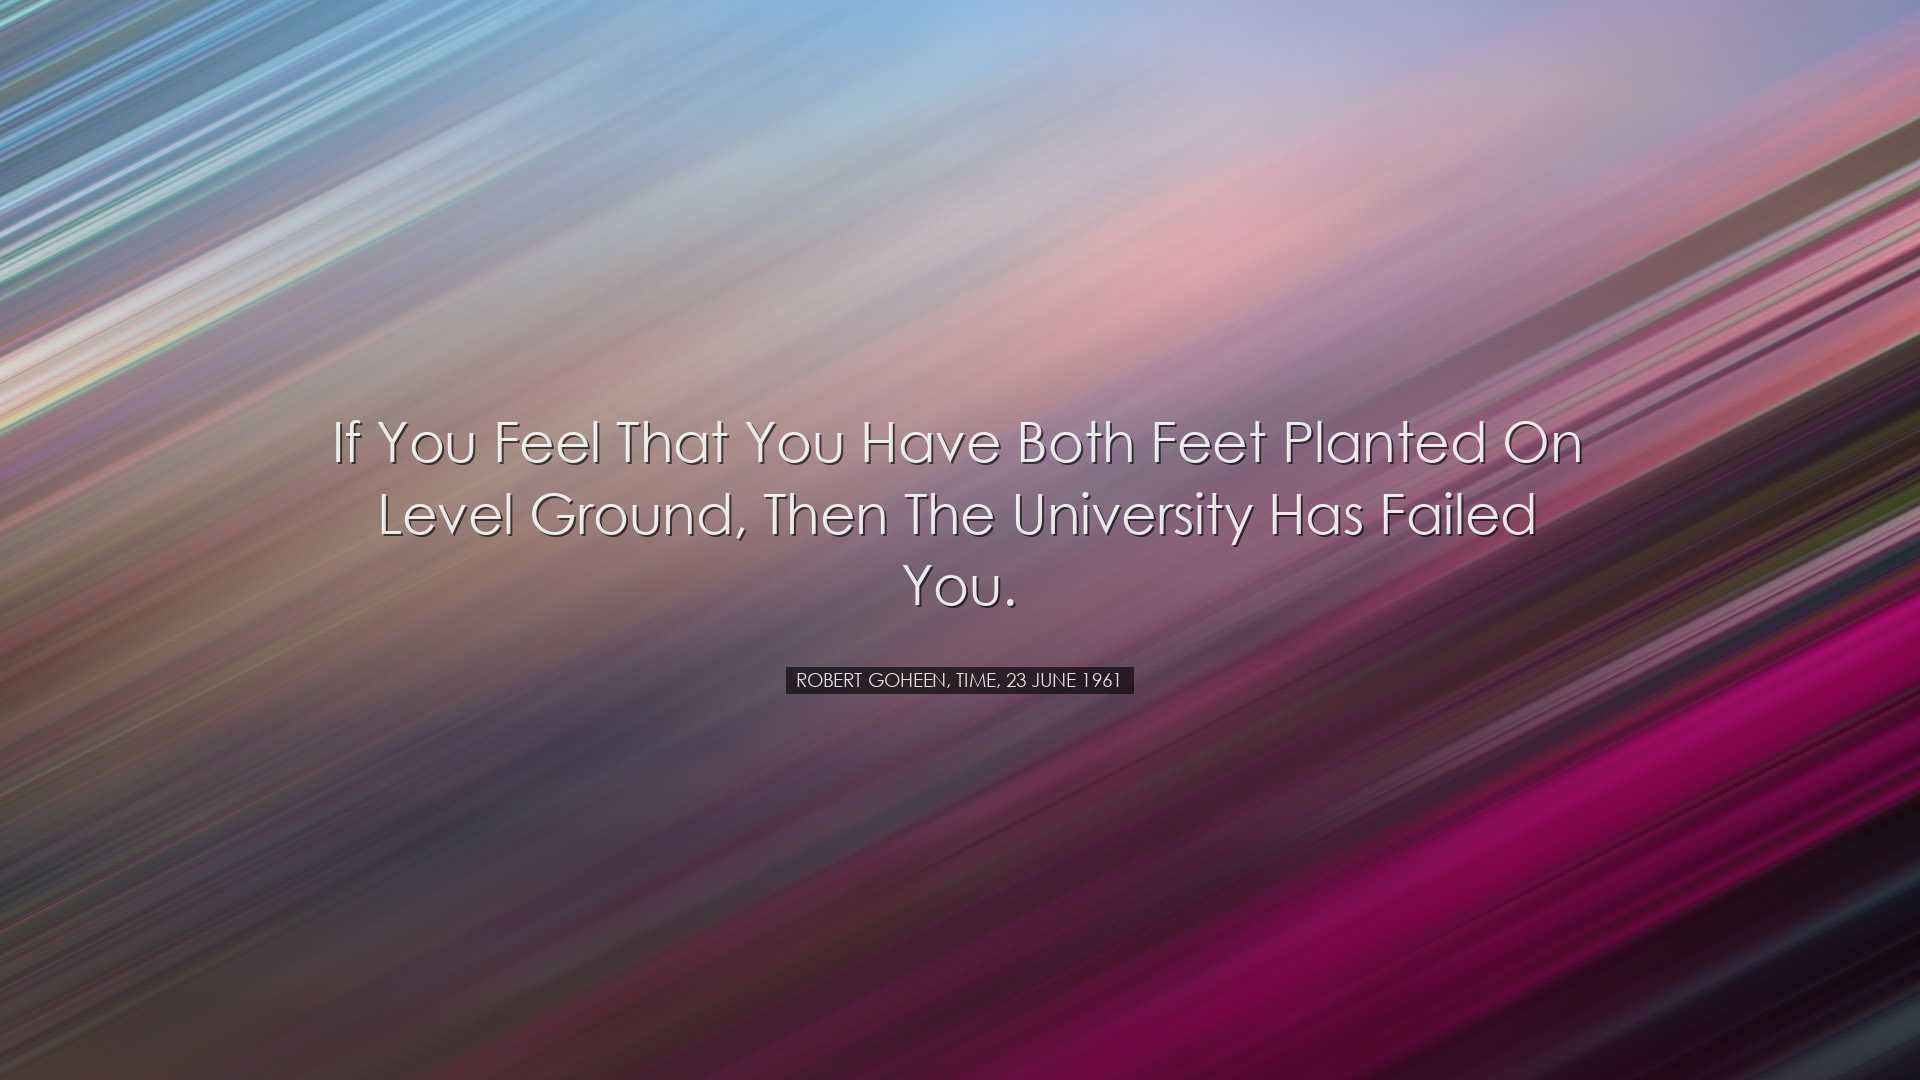 If you feel that you have both feet planted on level ground, then